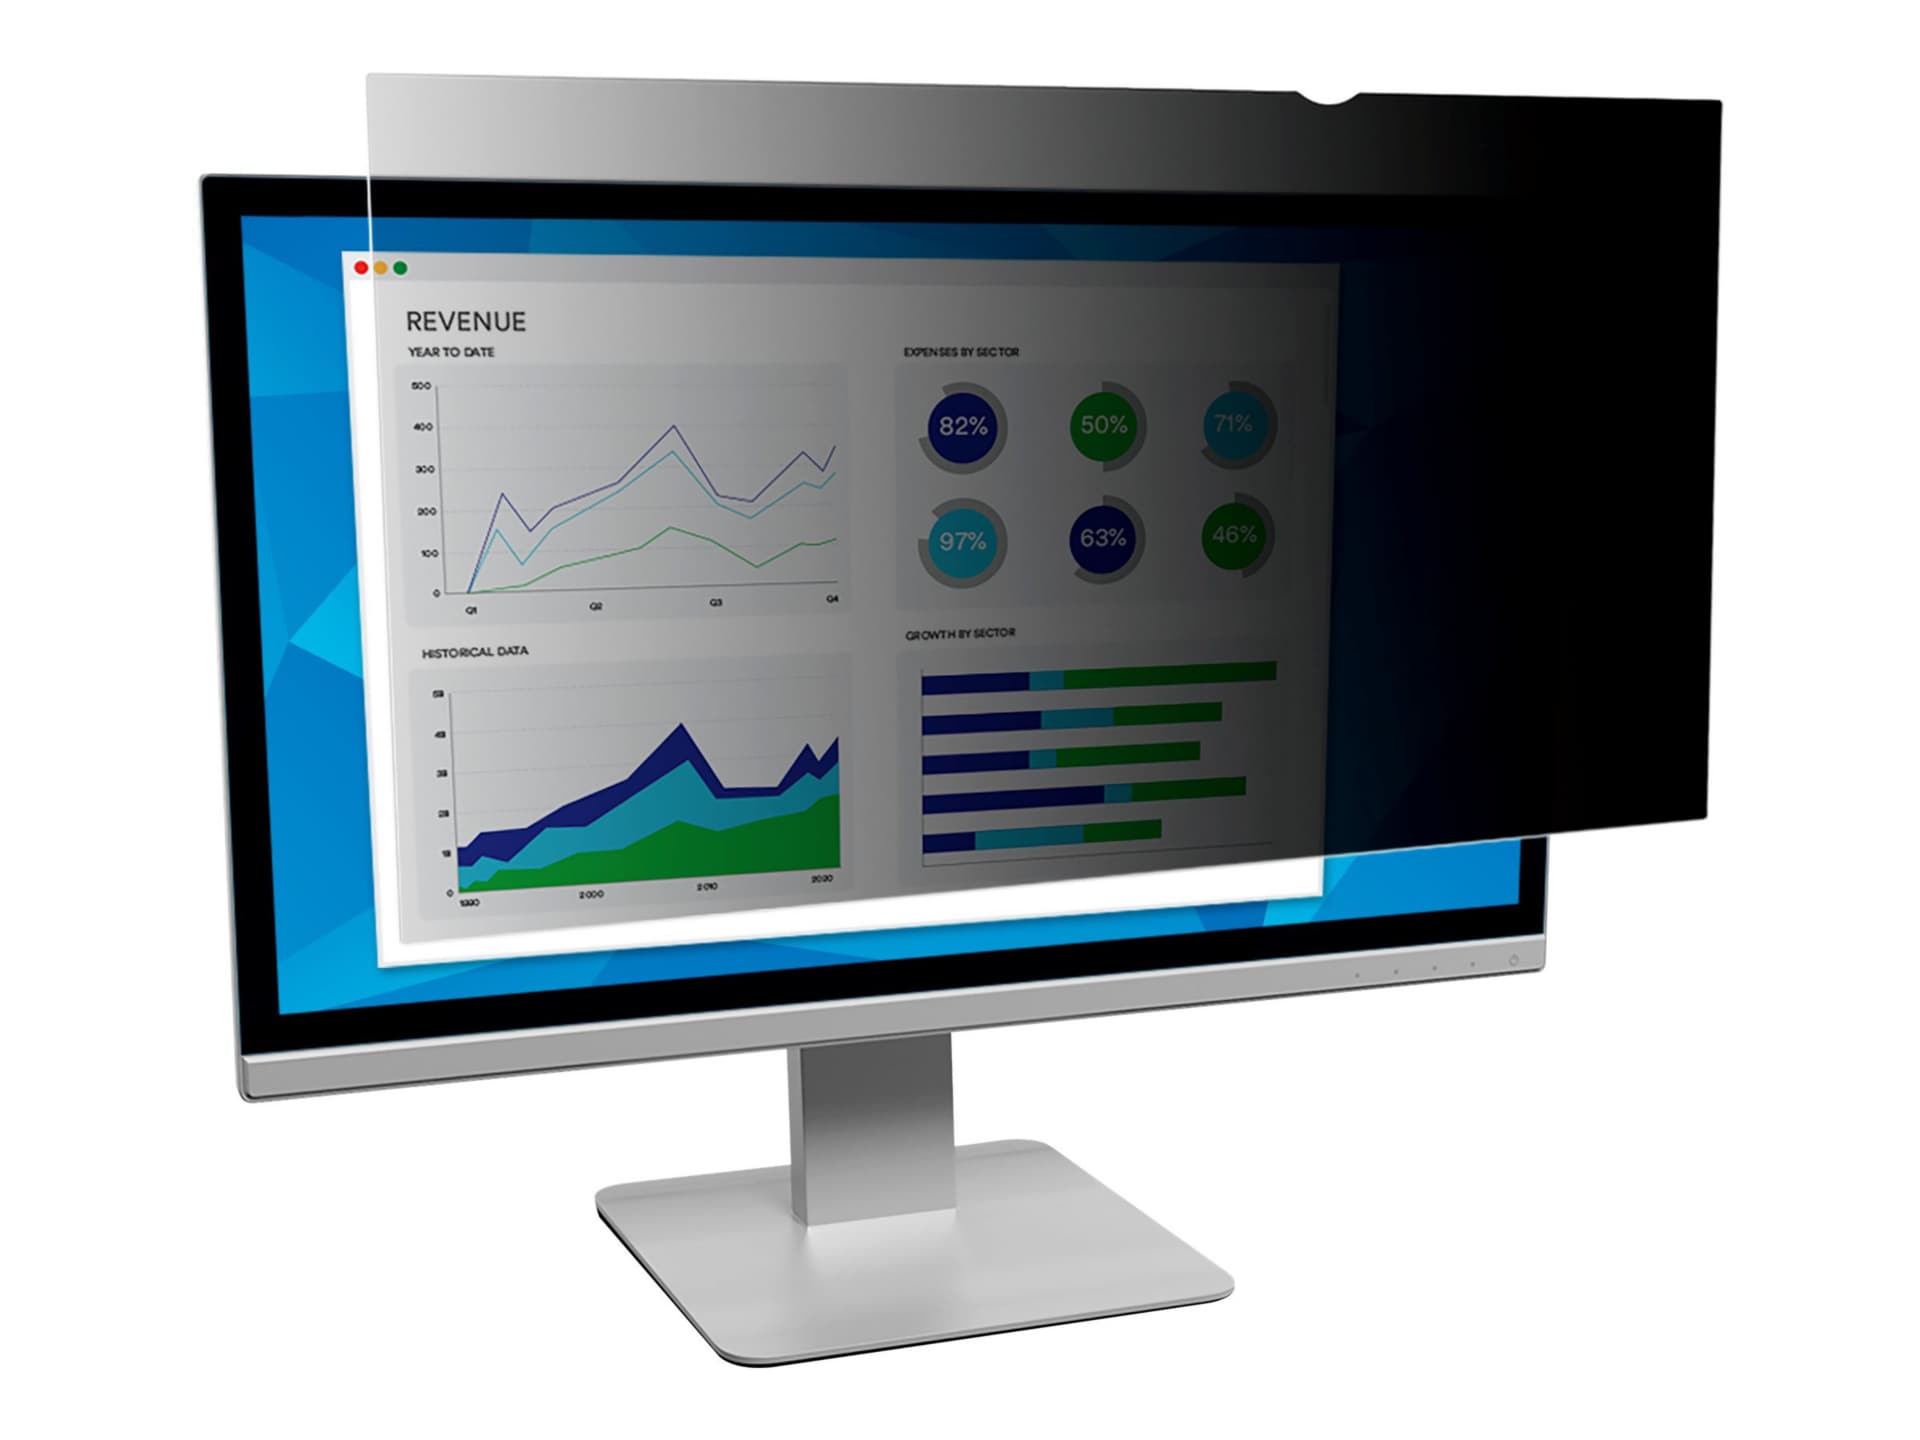 3M™ Privacy Filter for 17" Standard Monitor